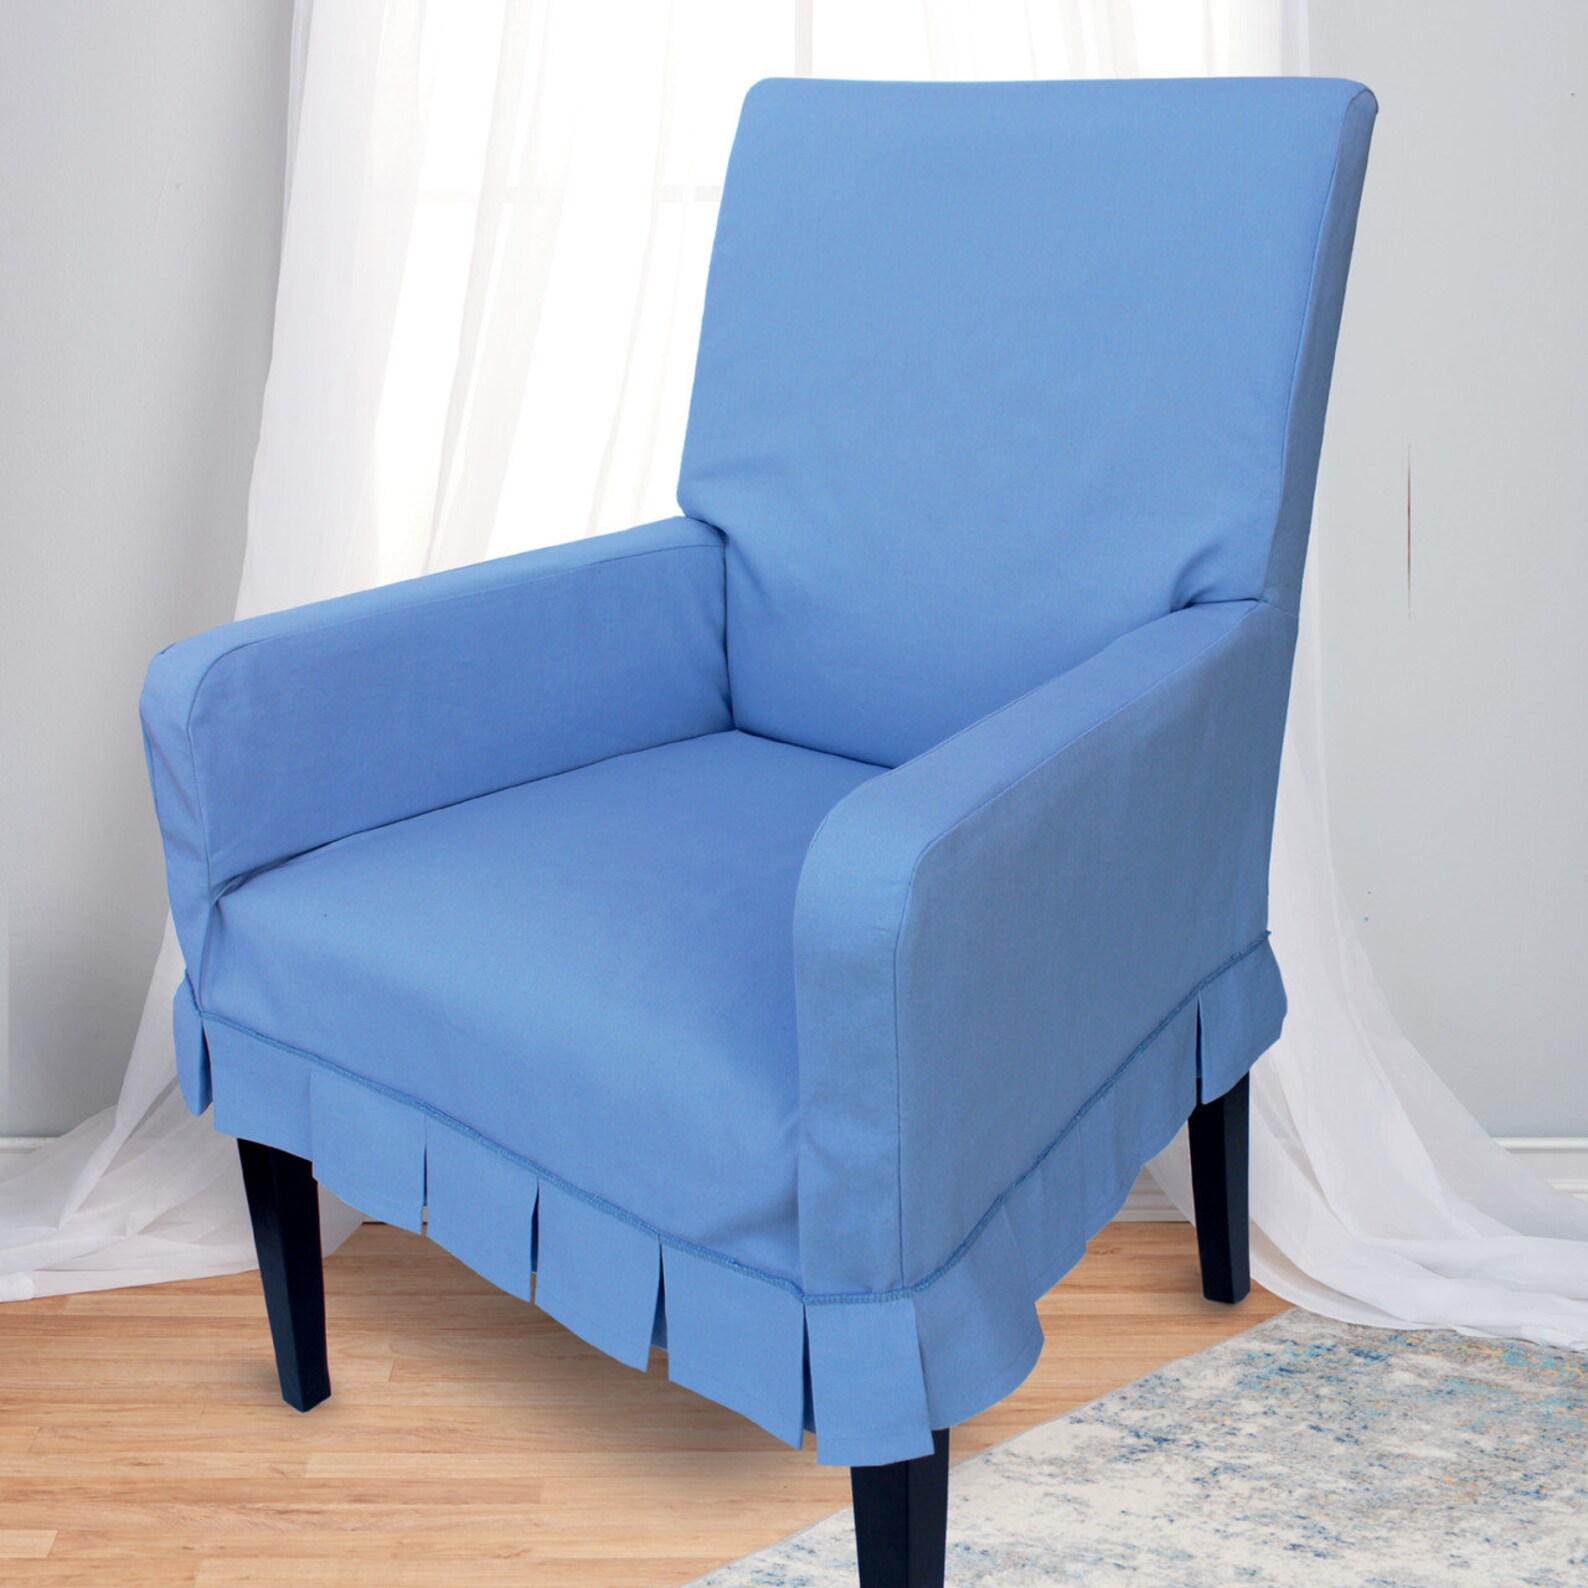 Etsy slip cover ideas sewing pattern for chair cover blue slip chair cover